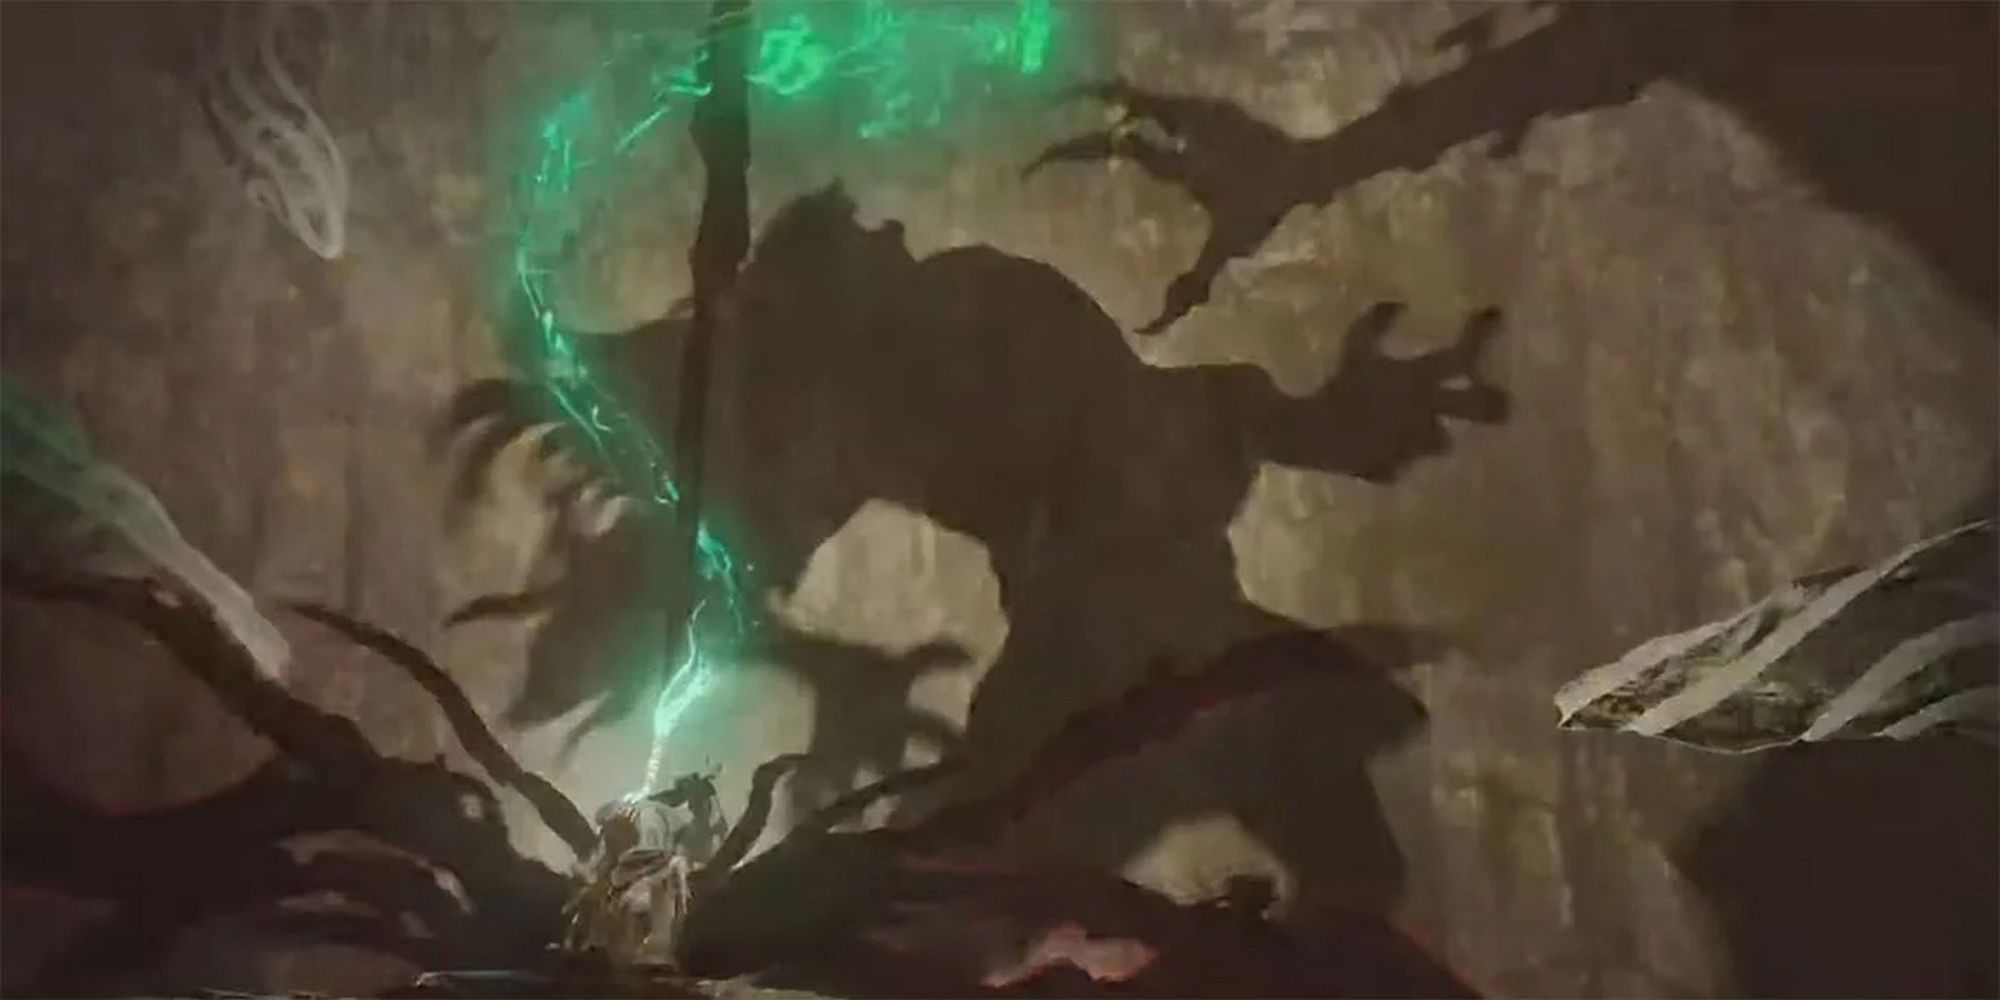 The Legend Of Zelda Breath Of The Wild 2 2019 Reveal Trailer - The Shadow On The Wall Being Attacked